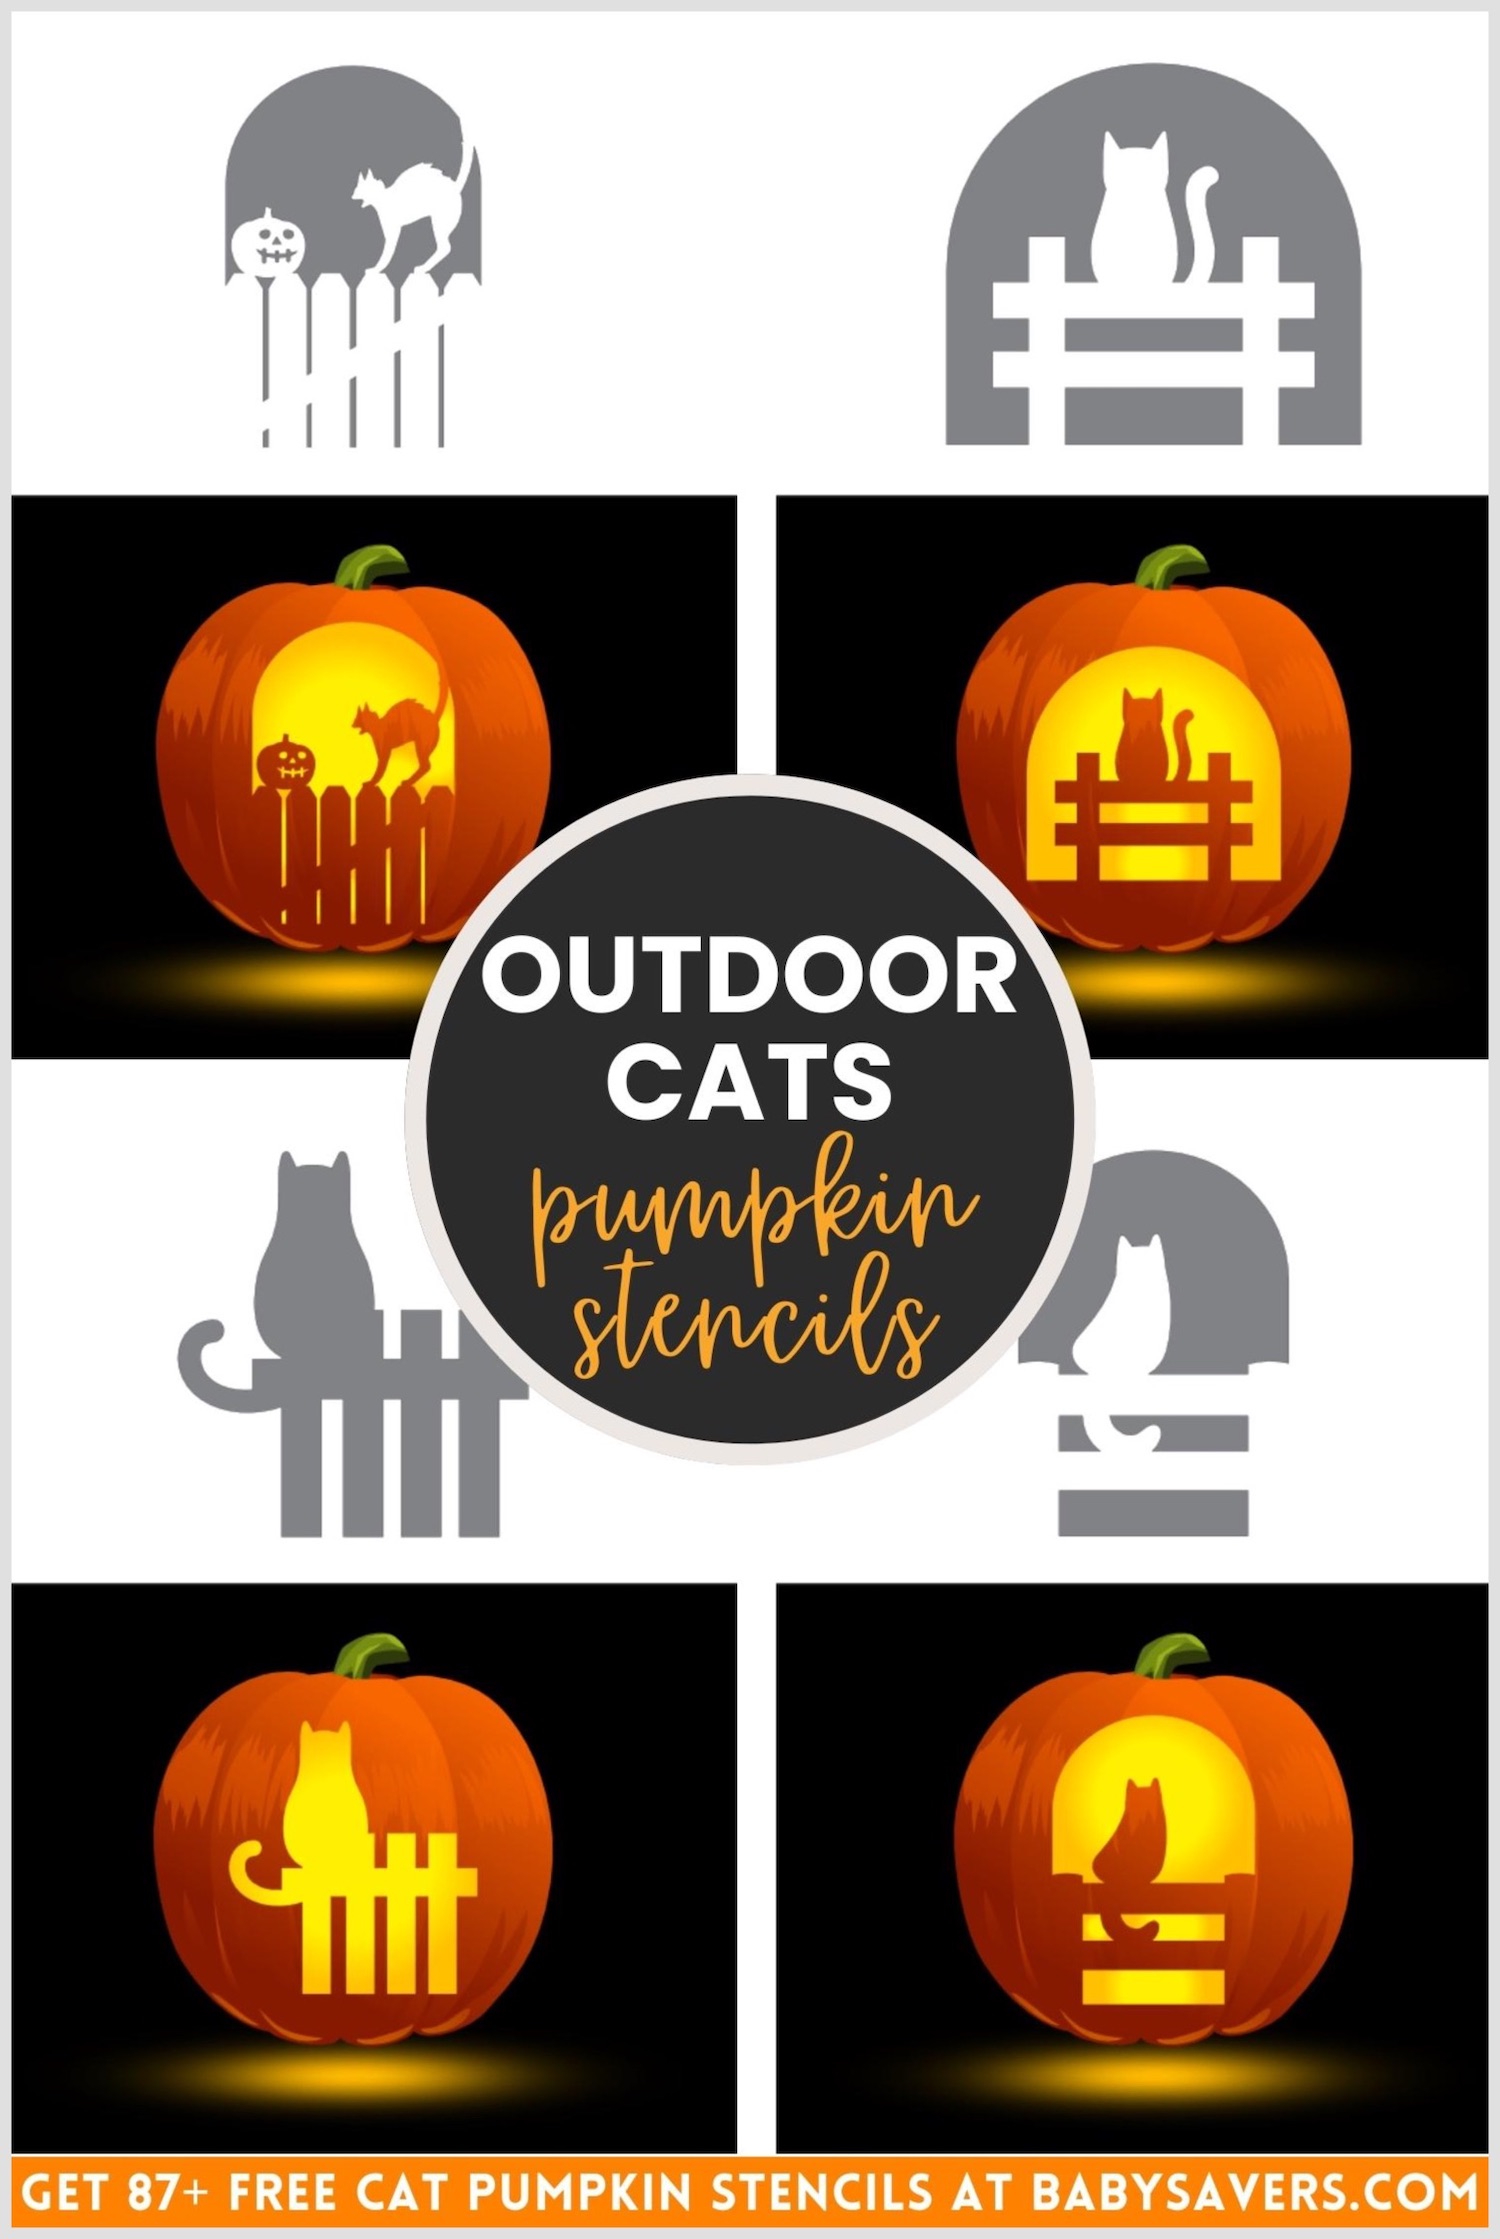 cat pumpkin stencils featuring outdoor cats sitting on fences